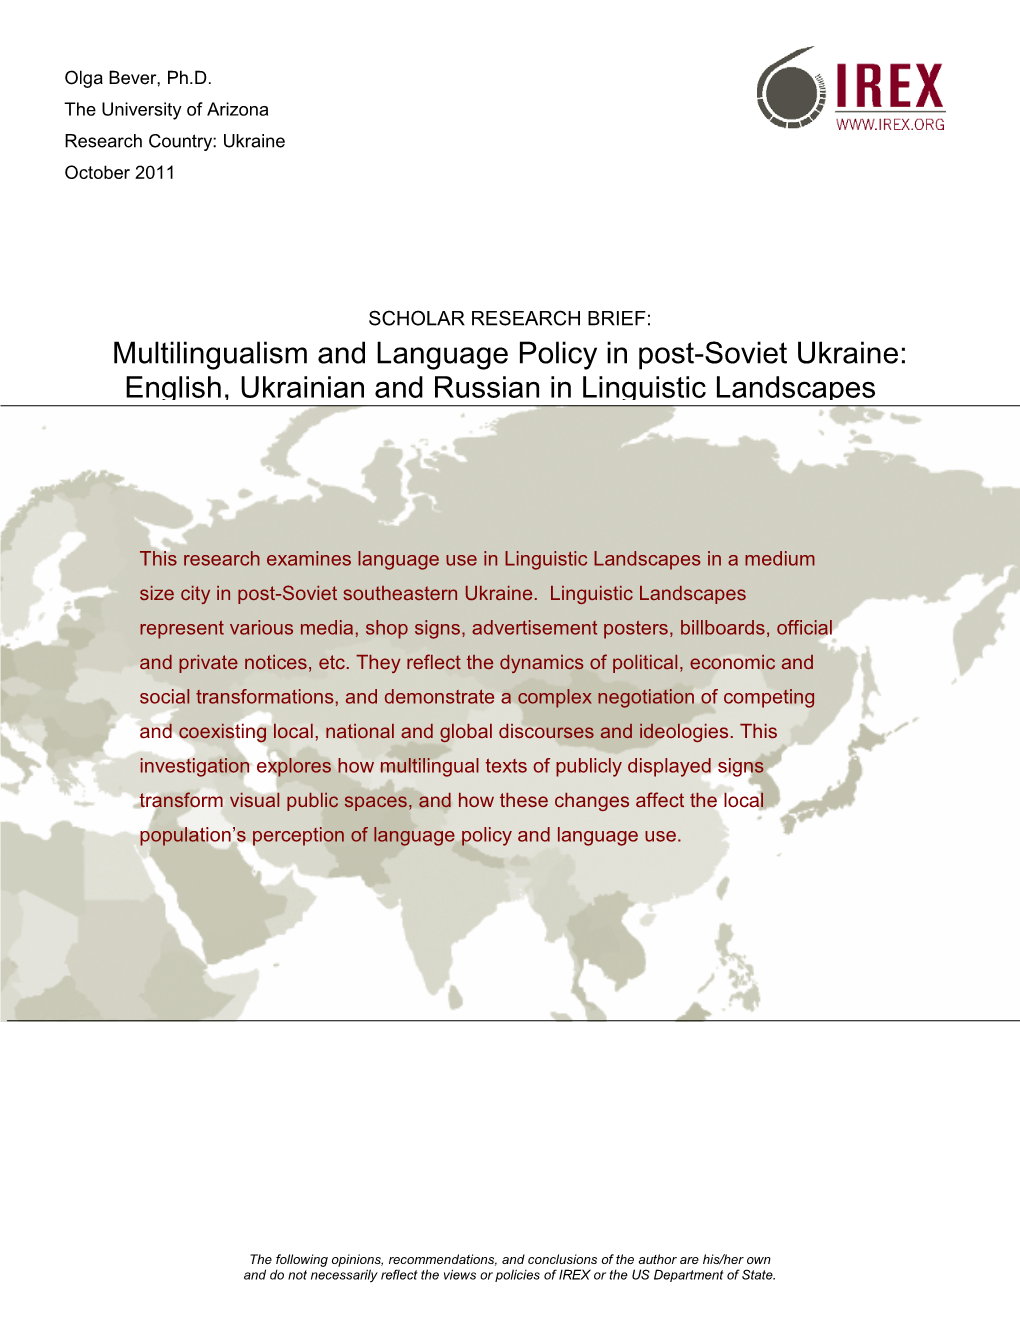 Multilingualism and Language Policy in Post-Soviet Ukraine: English, Ukrainian and Russian in Linguistic Landscapes